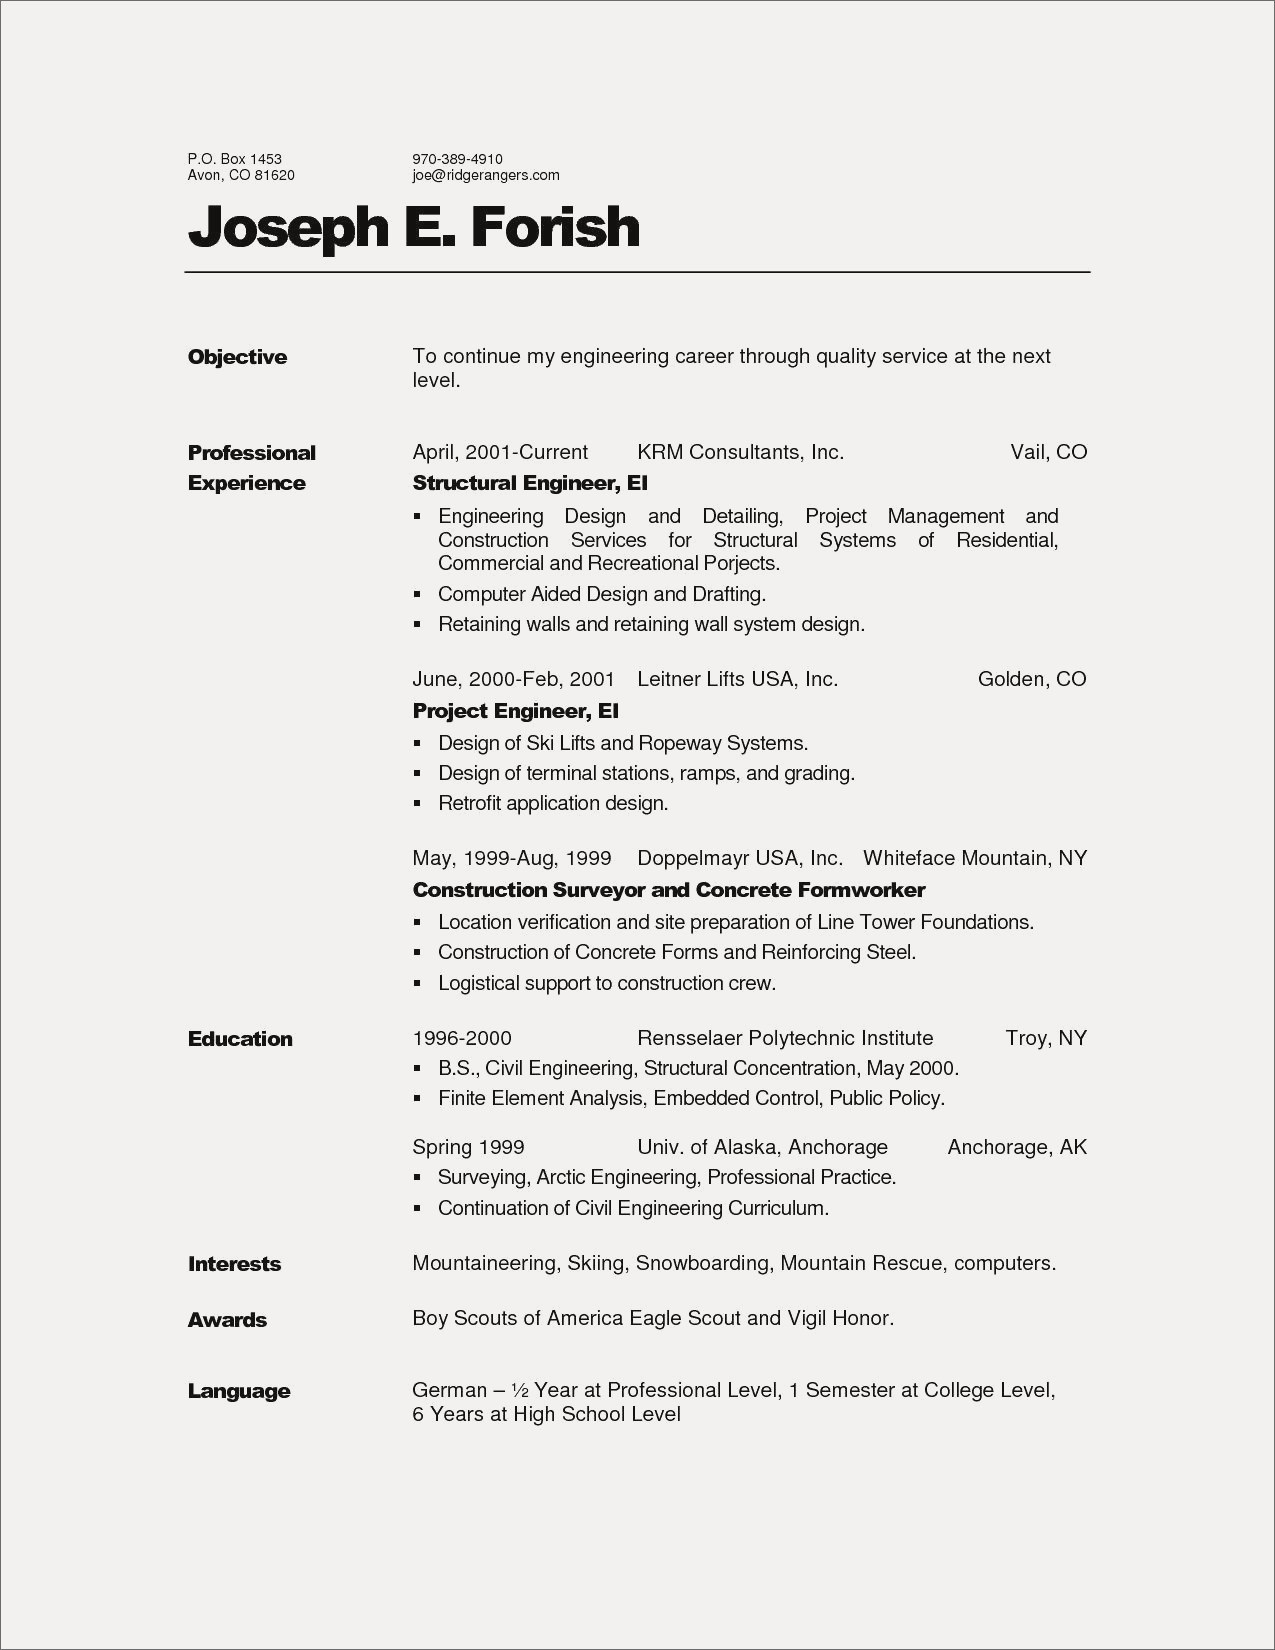 Best Resume Format 70 What Is The Best Resume Format To Use In 2018 Wwwauto Album